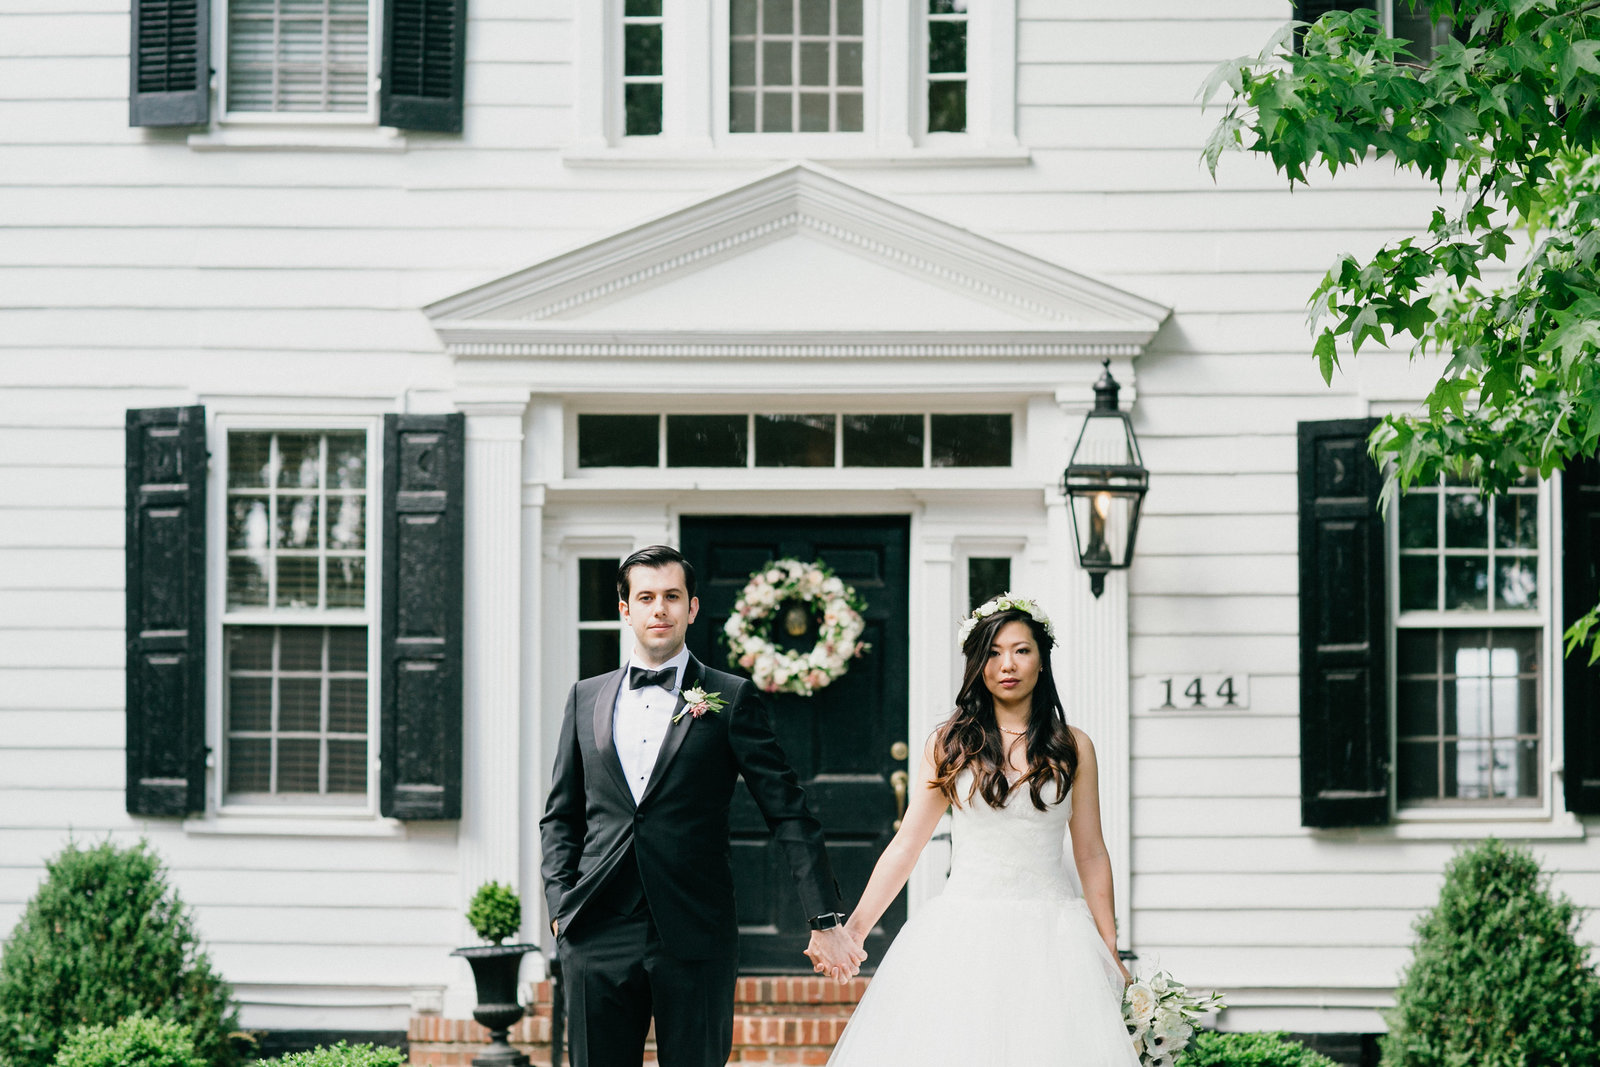 Groom and bride holding hands in front of the historic Fernbrook Inn House from the 18th century.